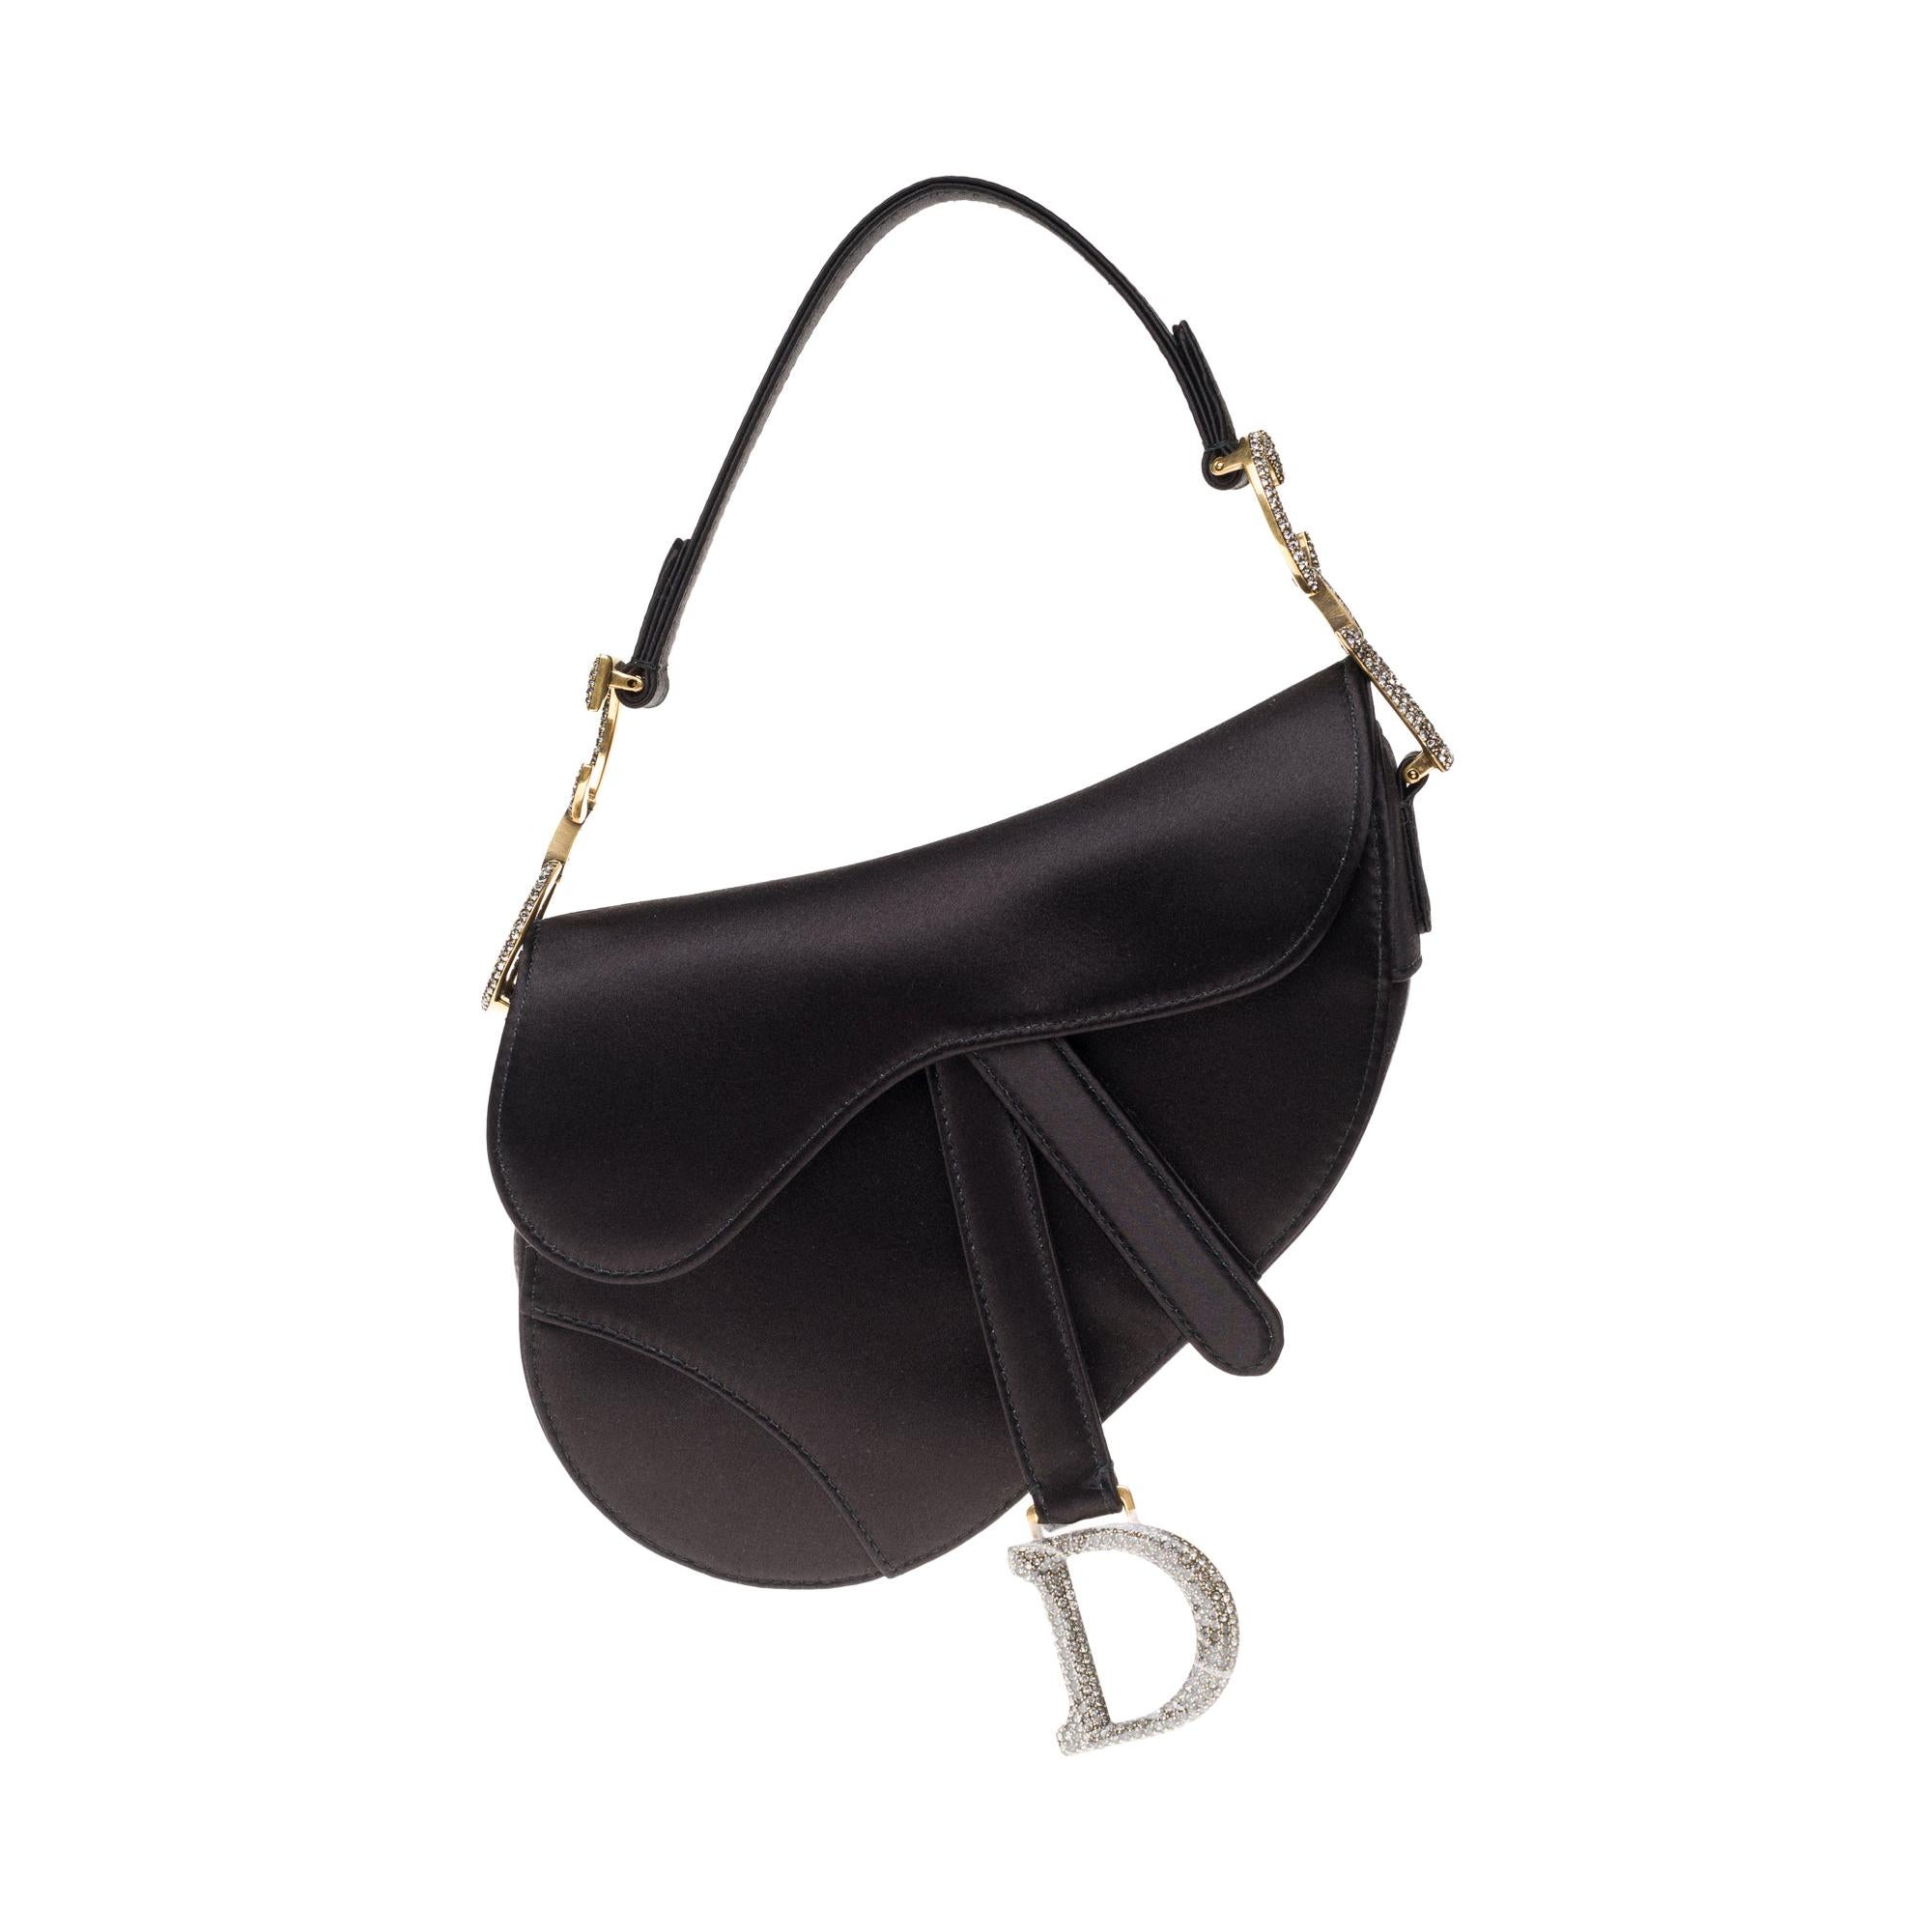 Gorgeous NEW Christian Dior Saddle bag in black satin, with